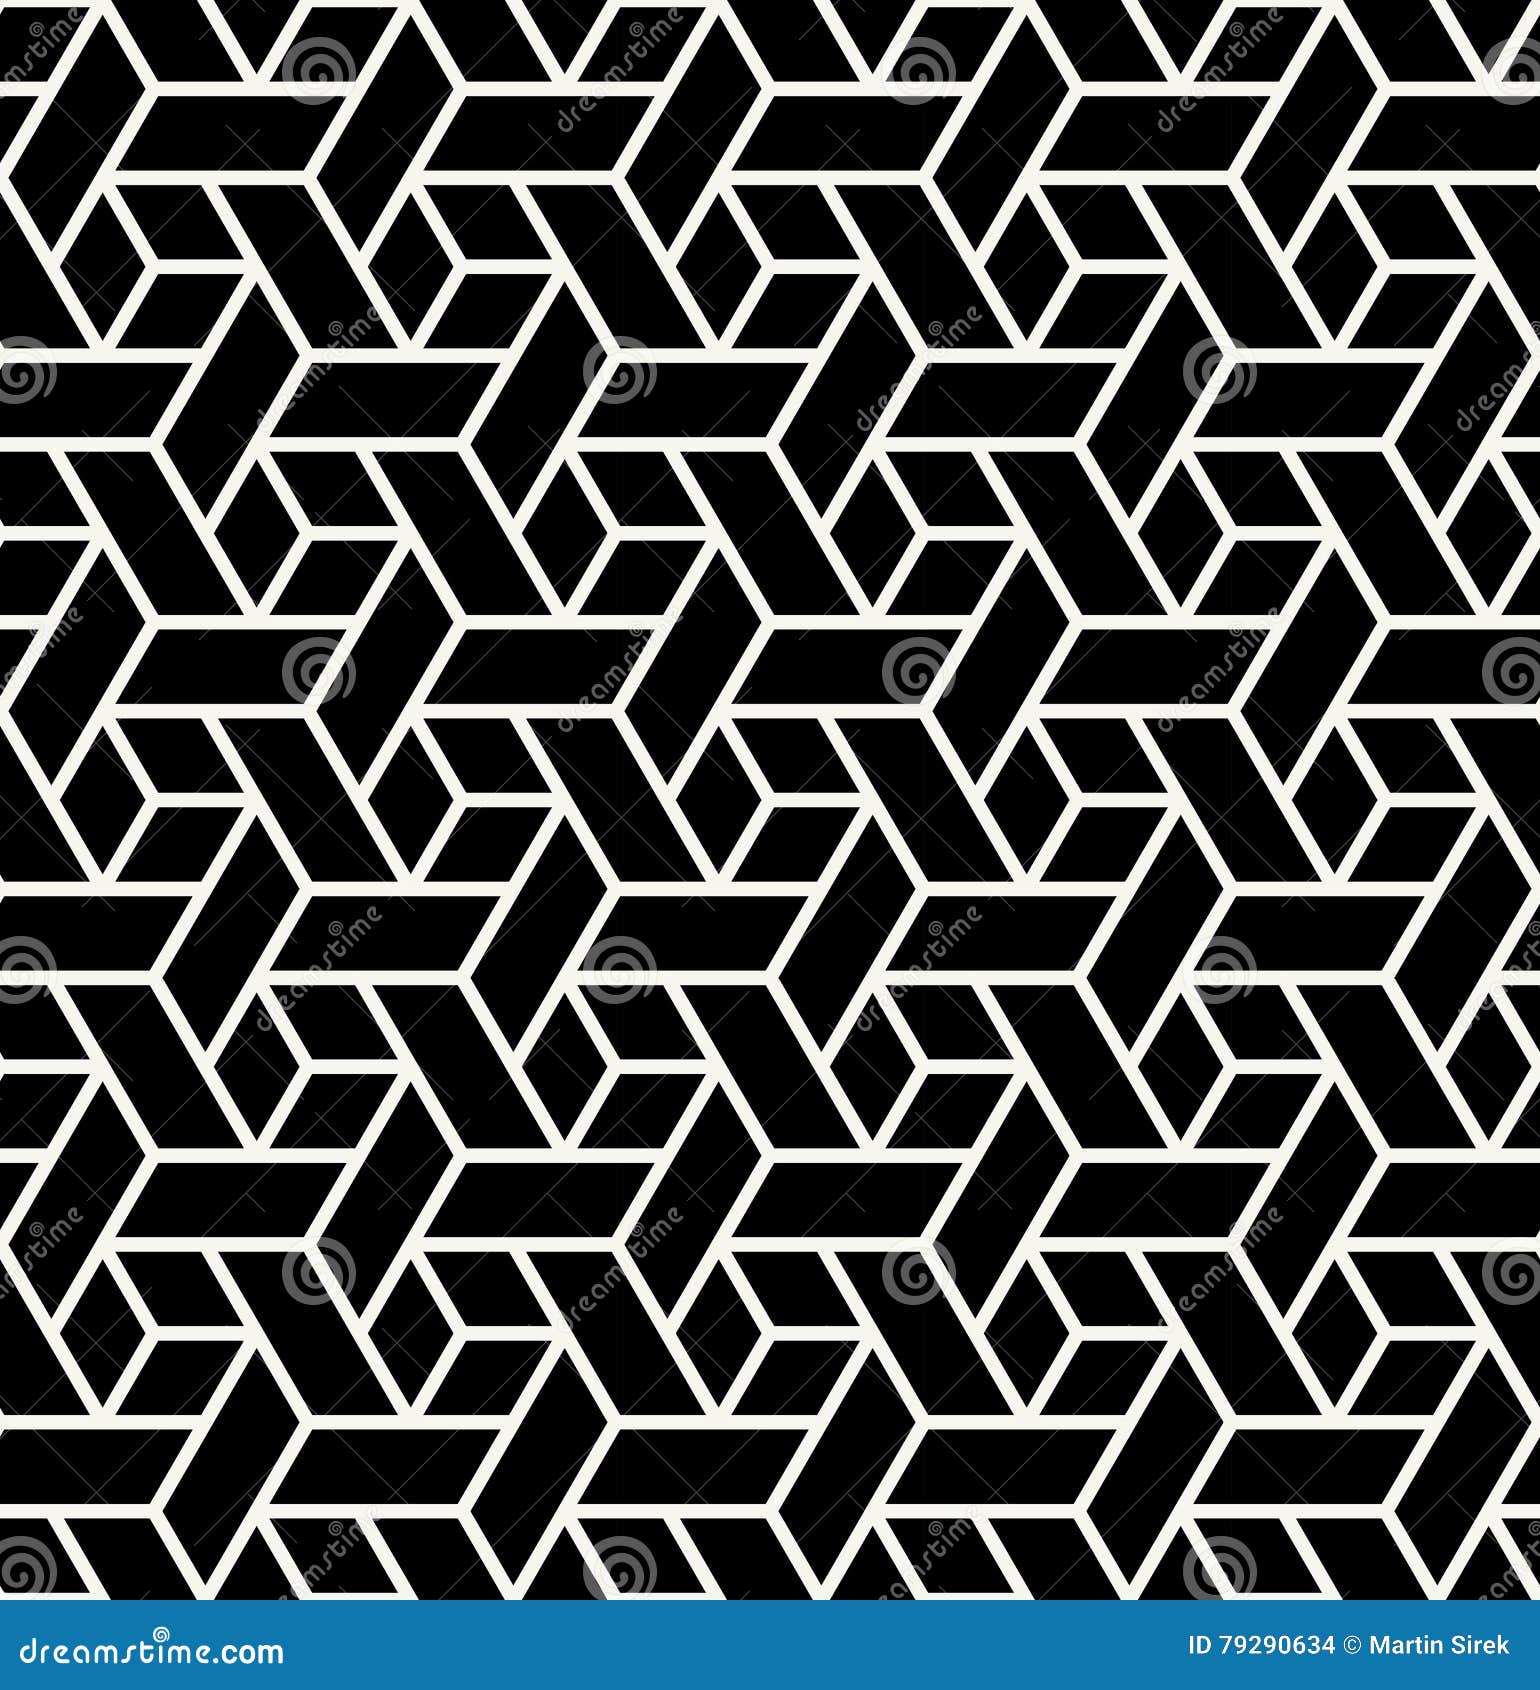 Geometric Black And White Graphic Design Print 3d Cubes Pattern Stock